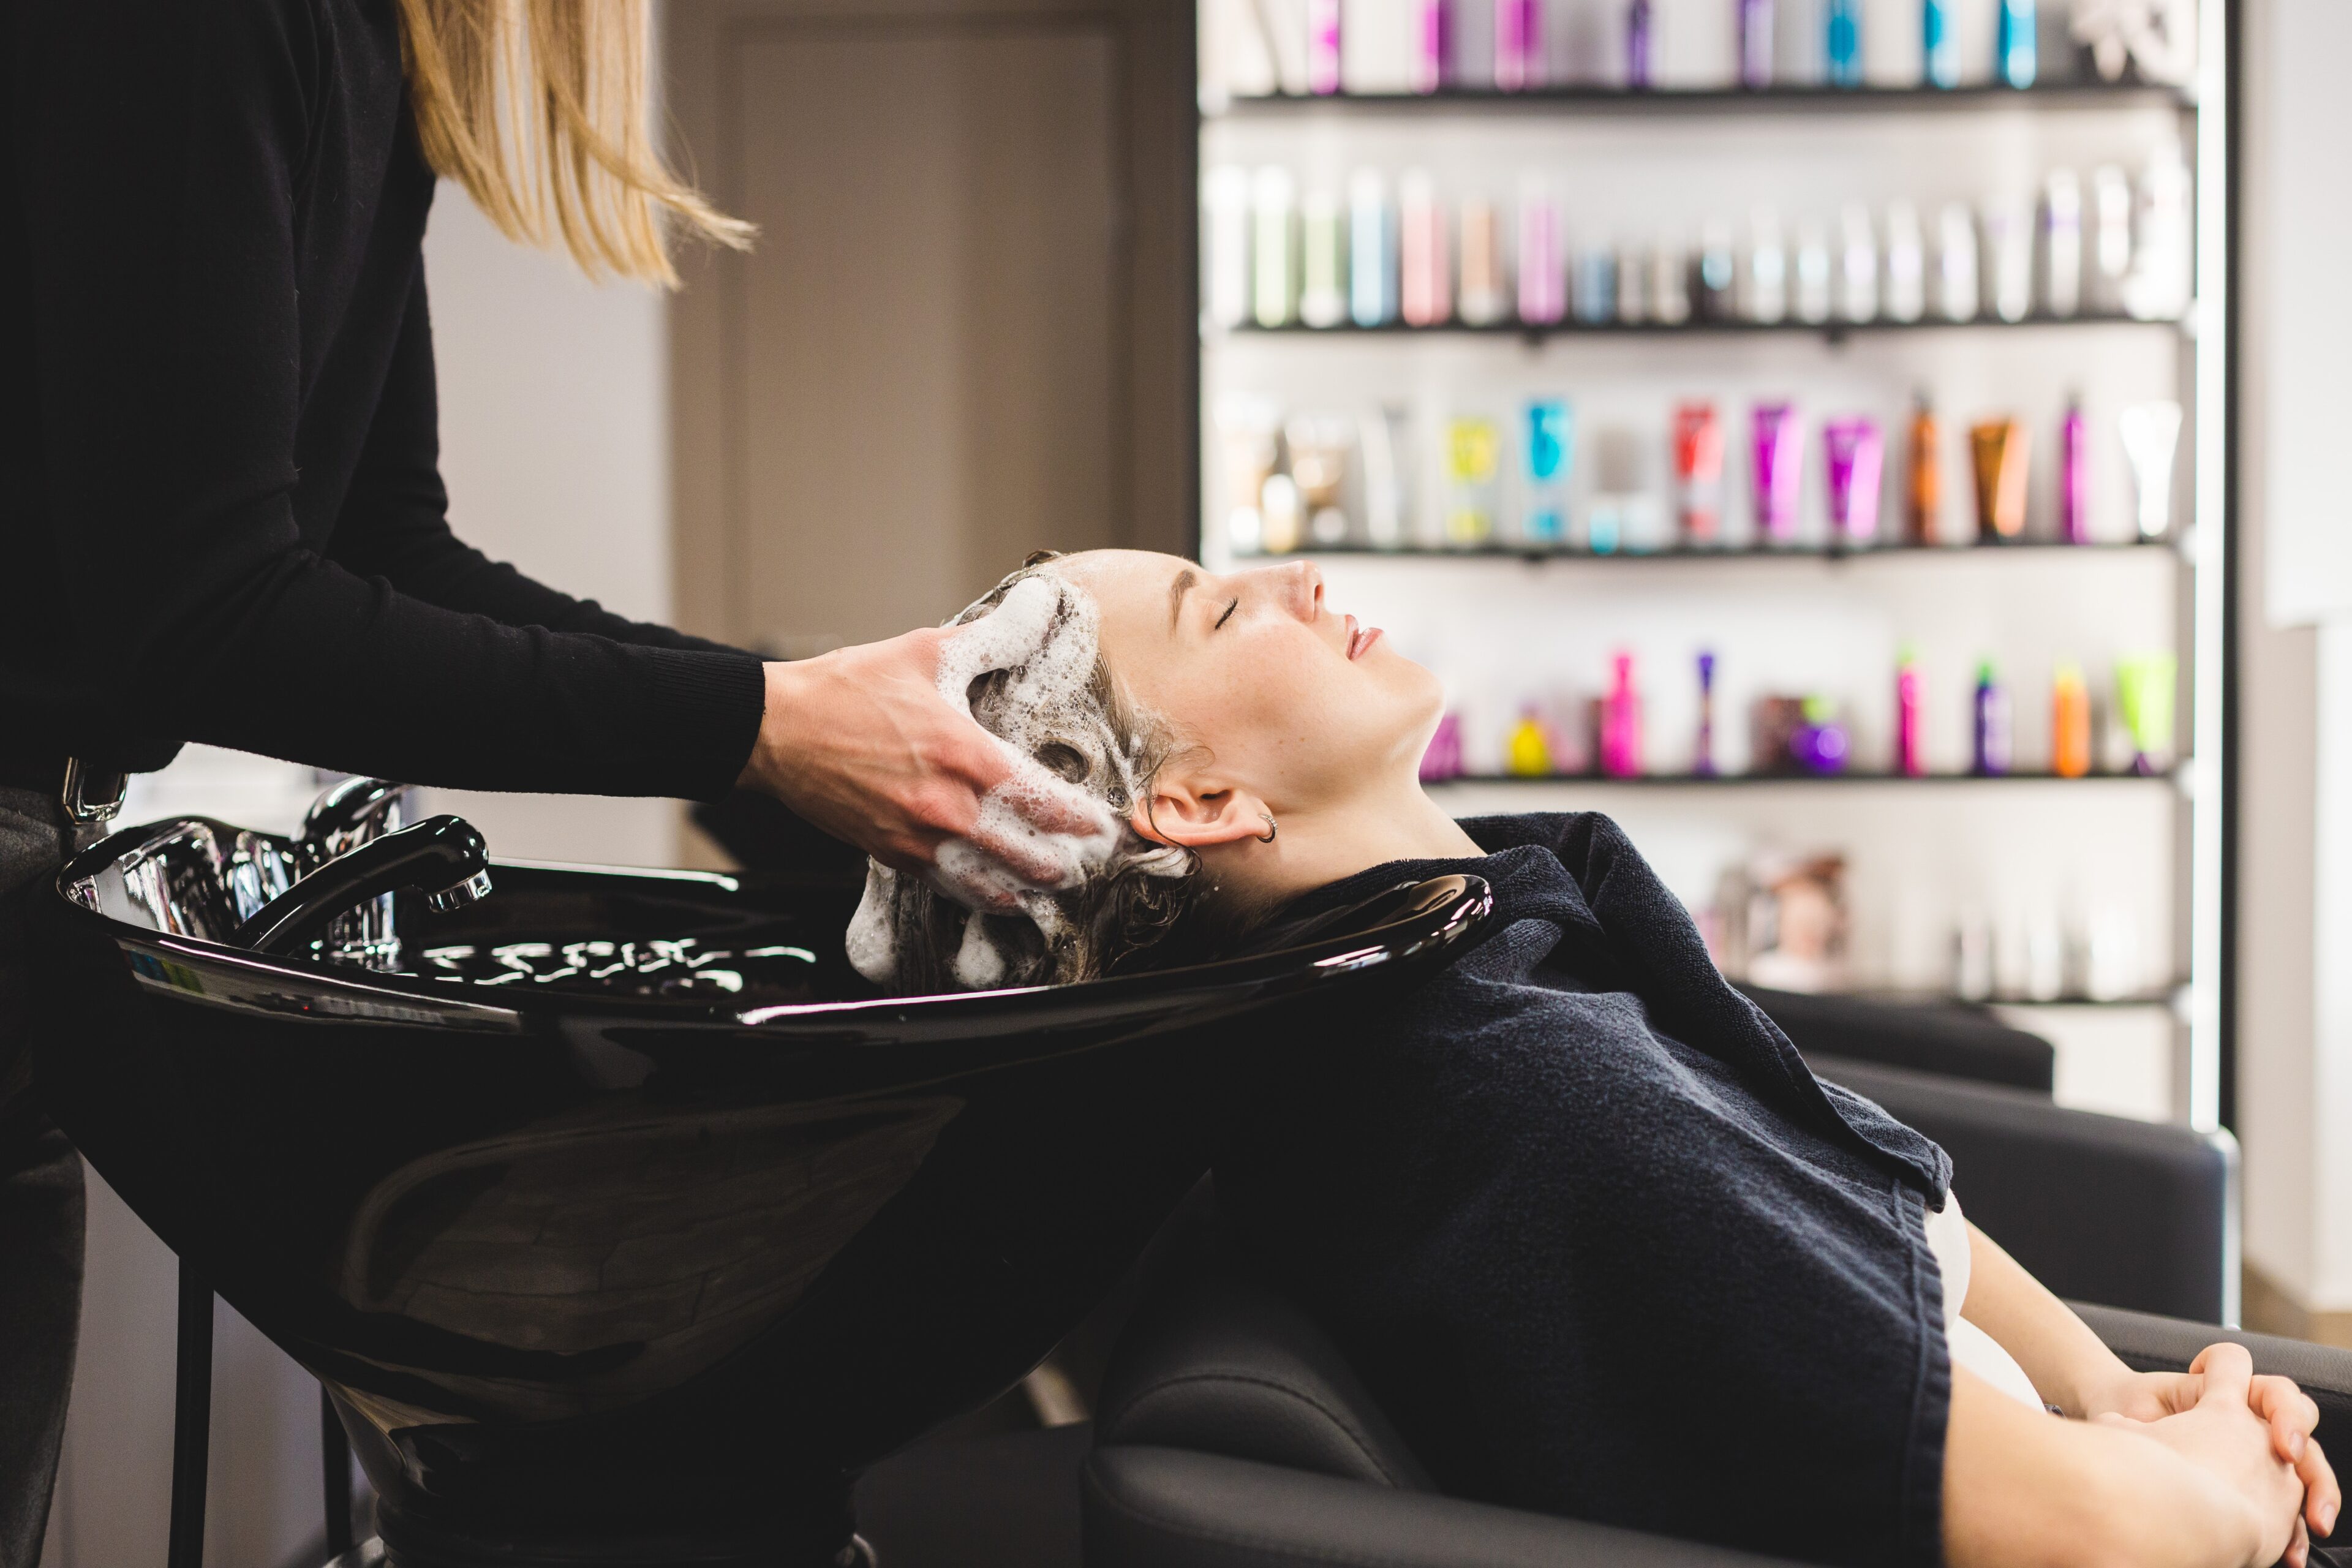 A girl is having her hair washed at a salon